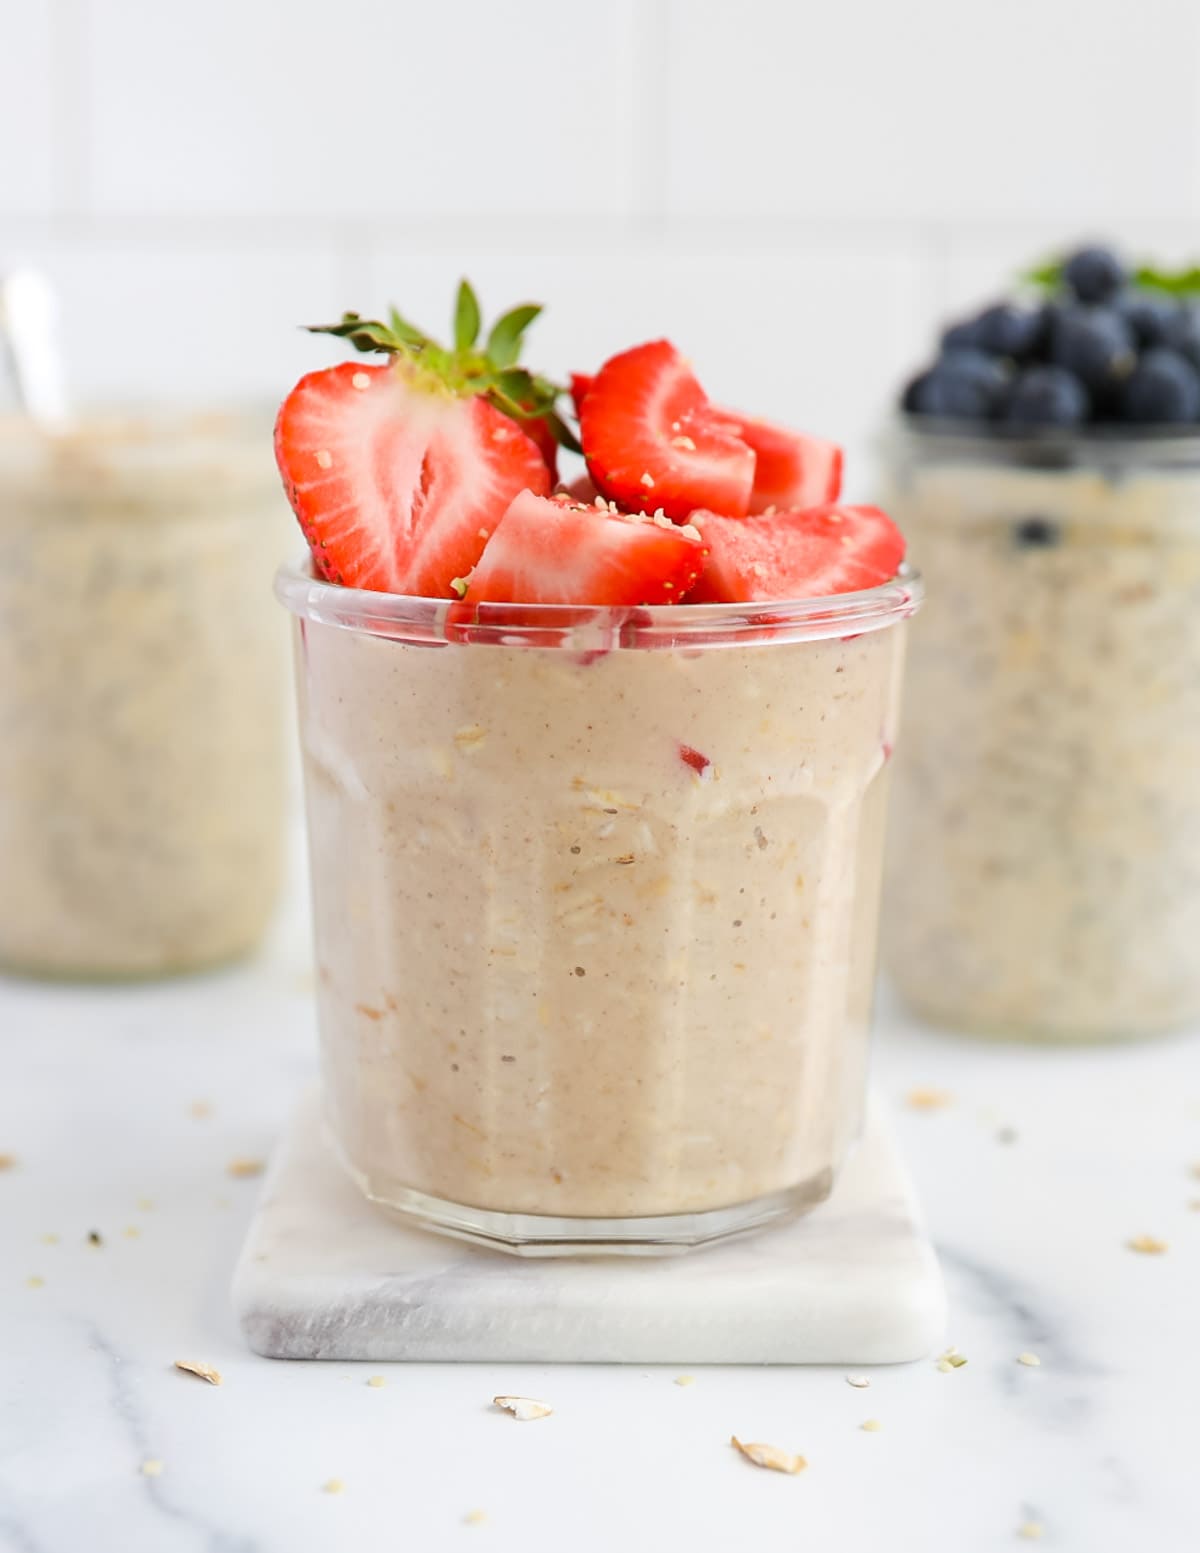 Three jars of overnight oats with fresh strawberries and blueberries on top